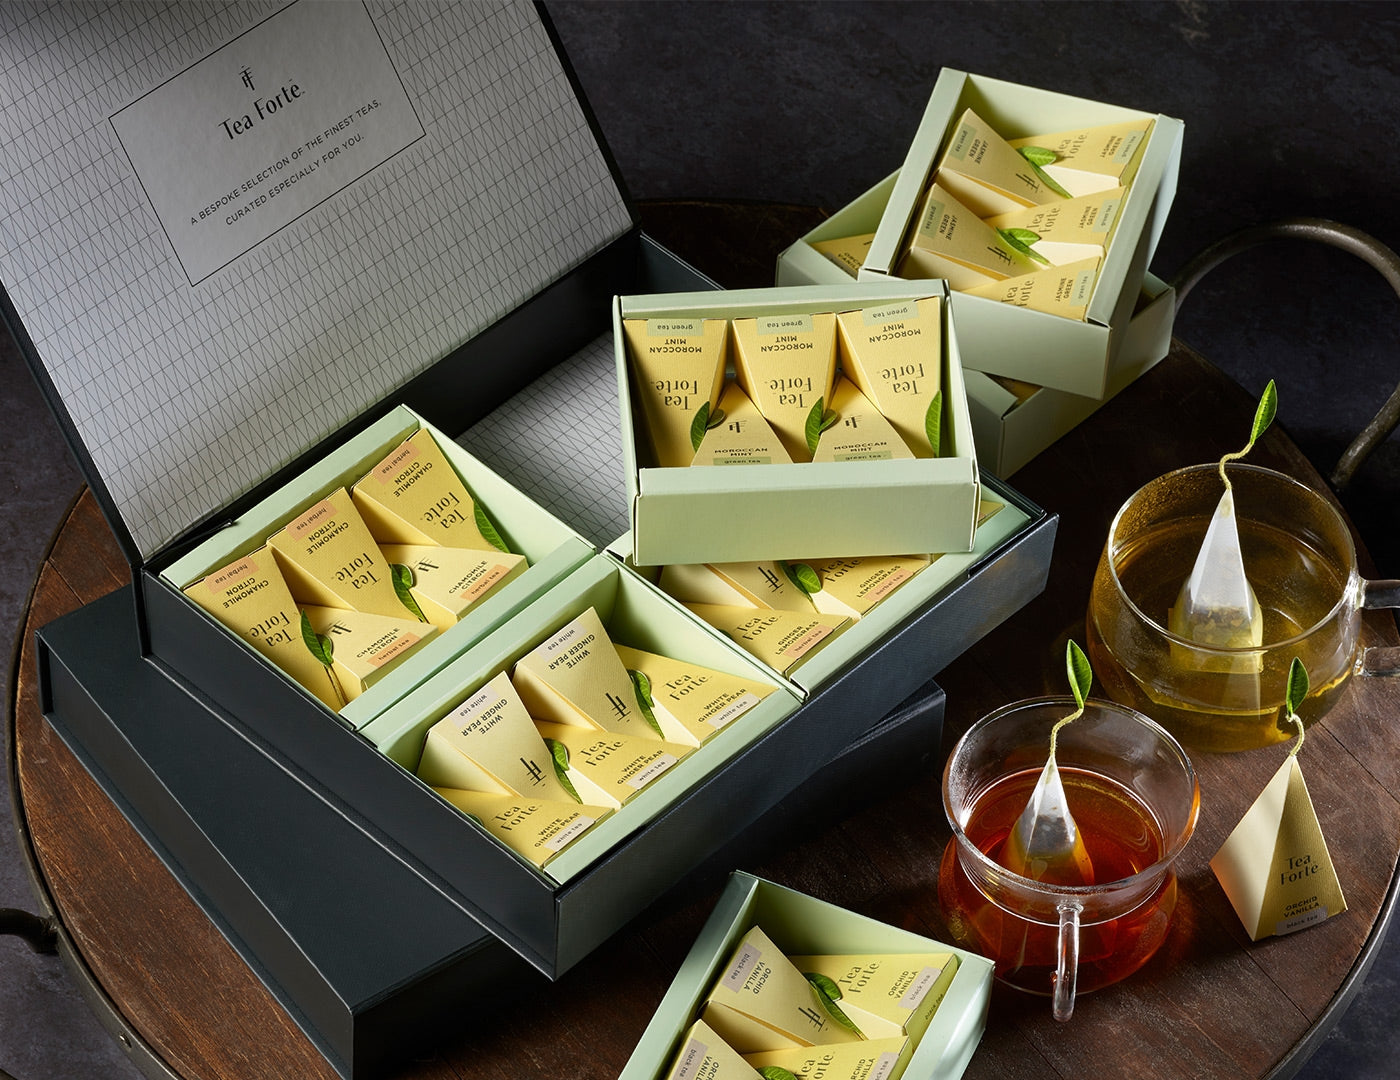 Infusion & tea gift boxes, gift ideas for your nearest and dearest